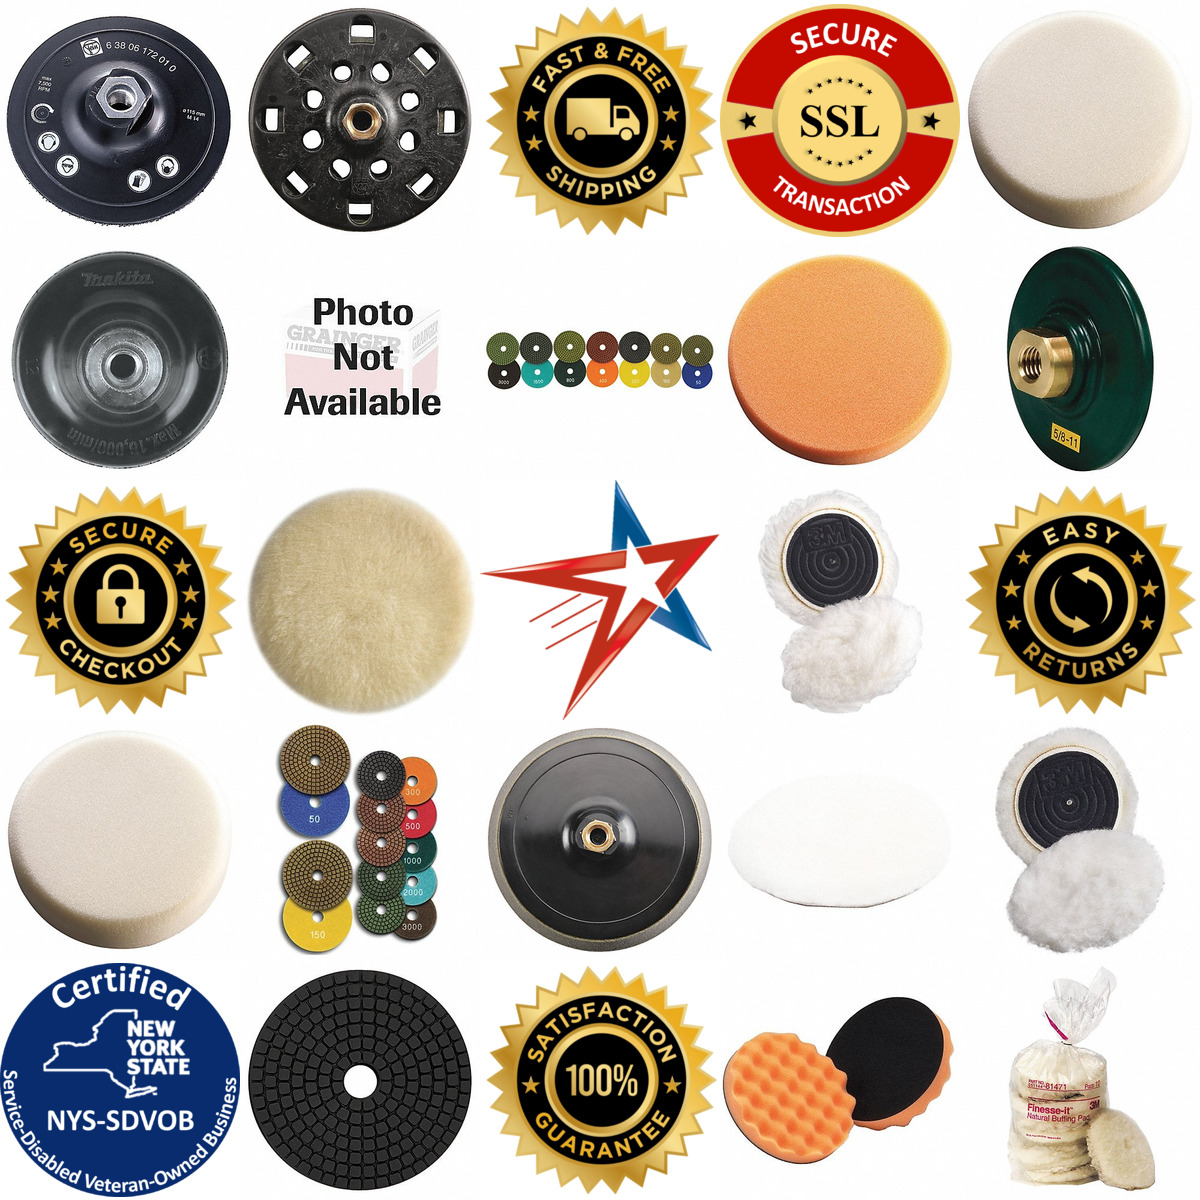 A selection of Bonnets and Pads products on GoVets